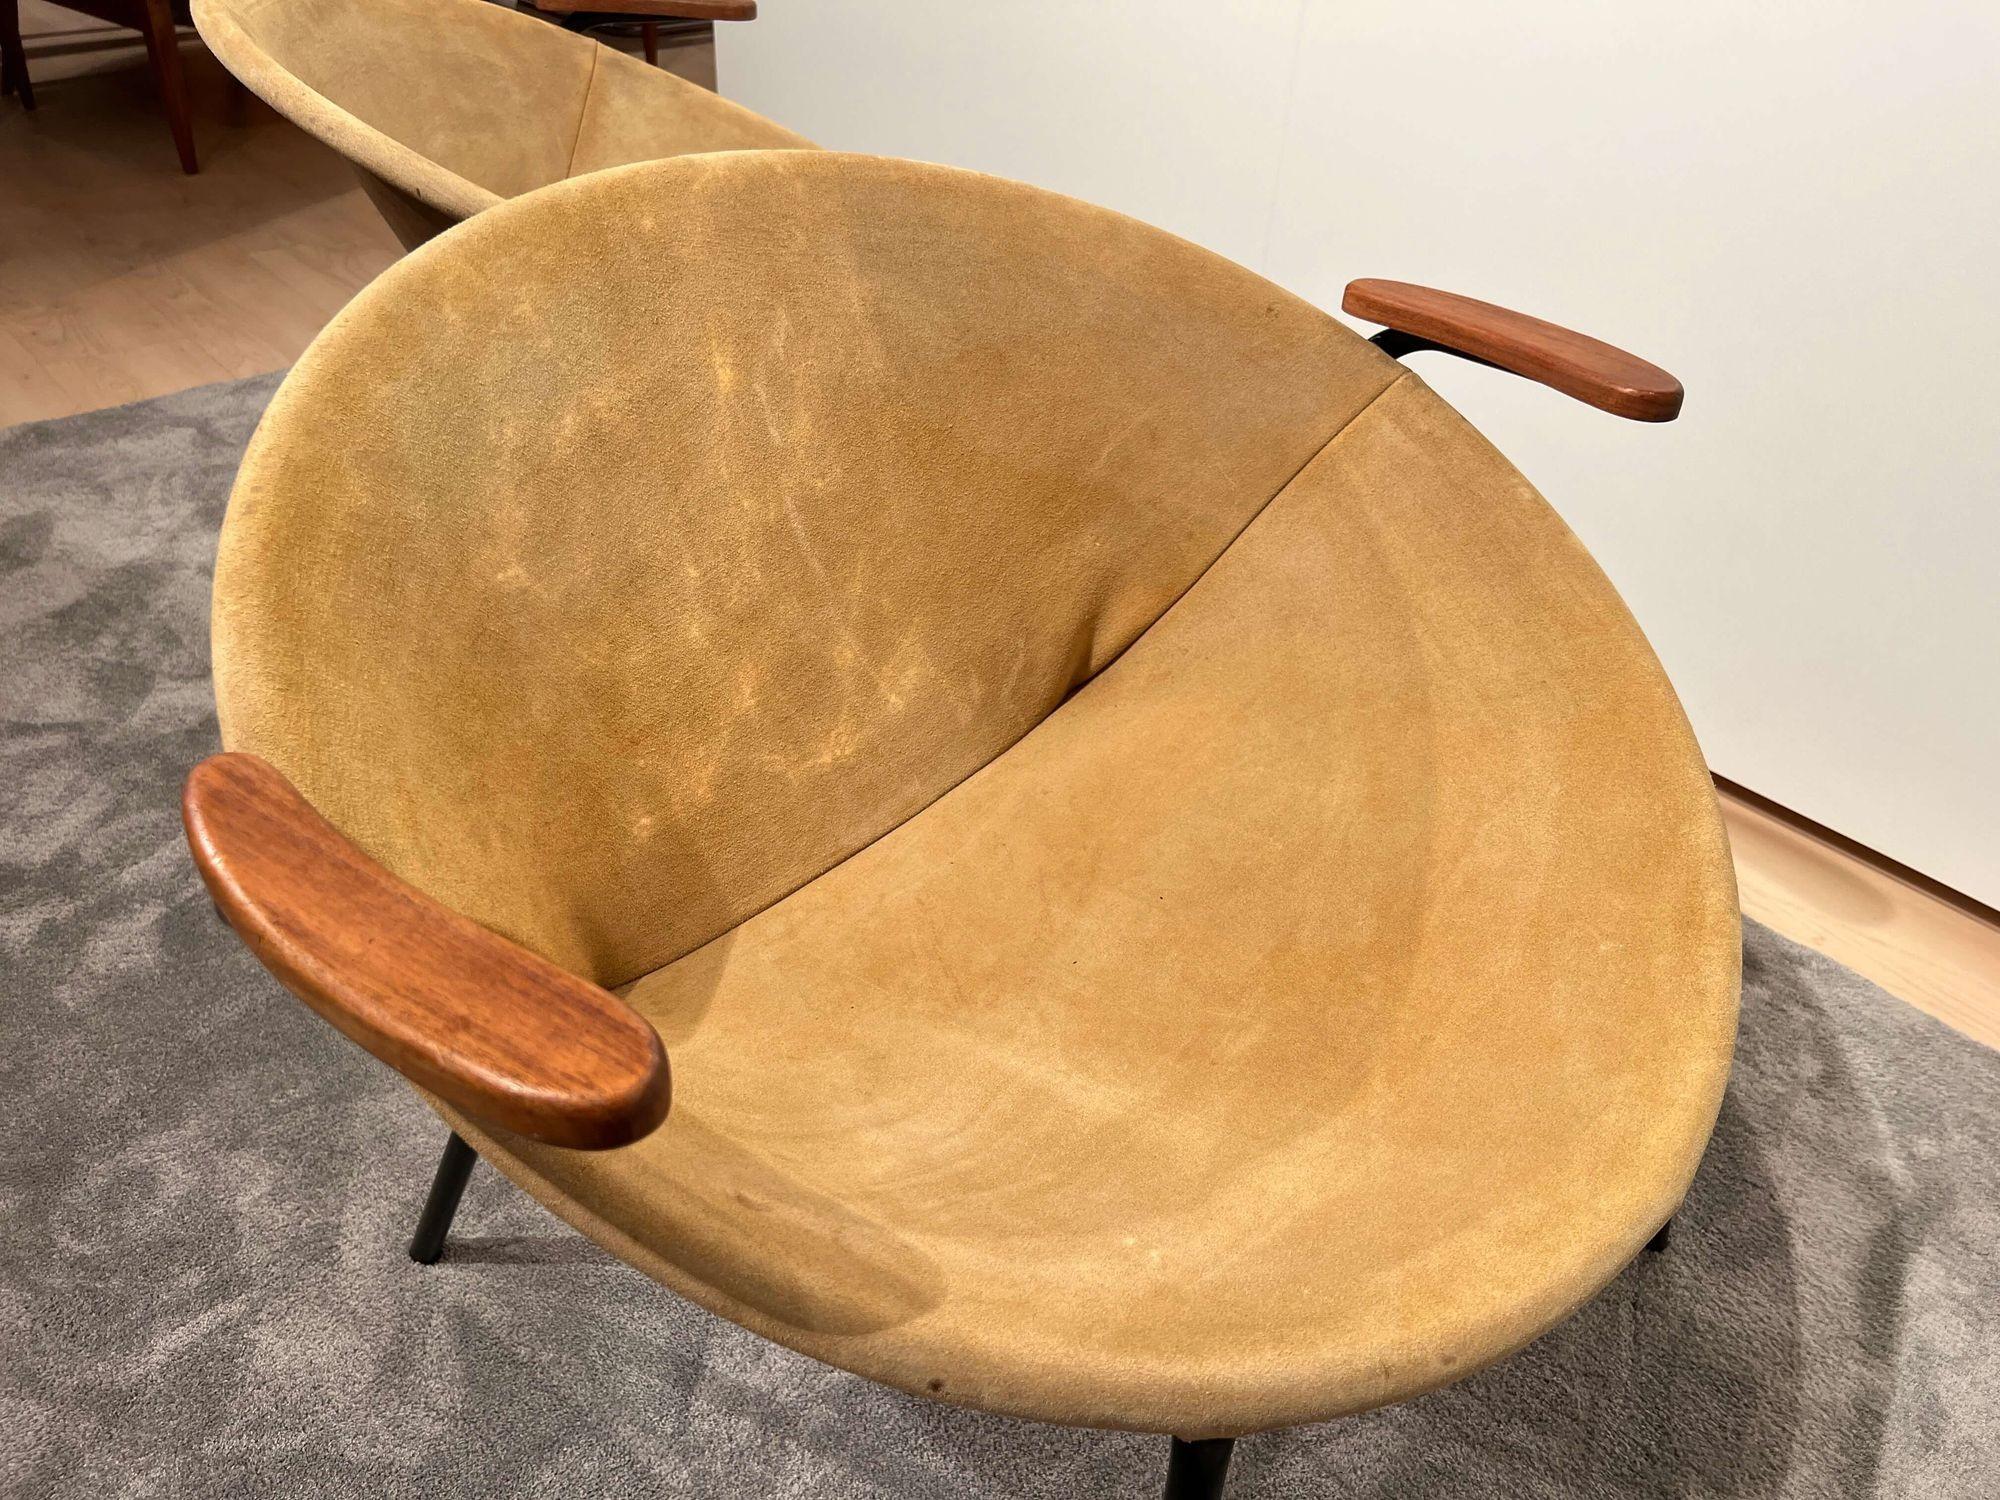 Pair of ‚Balloon’ Lounge Chairs by Hans Olsen, Yellow Suede, Denmark, circa 1960 For Sale 3